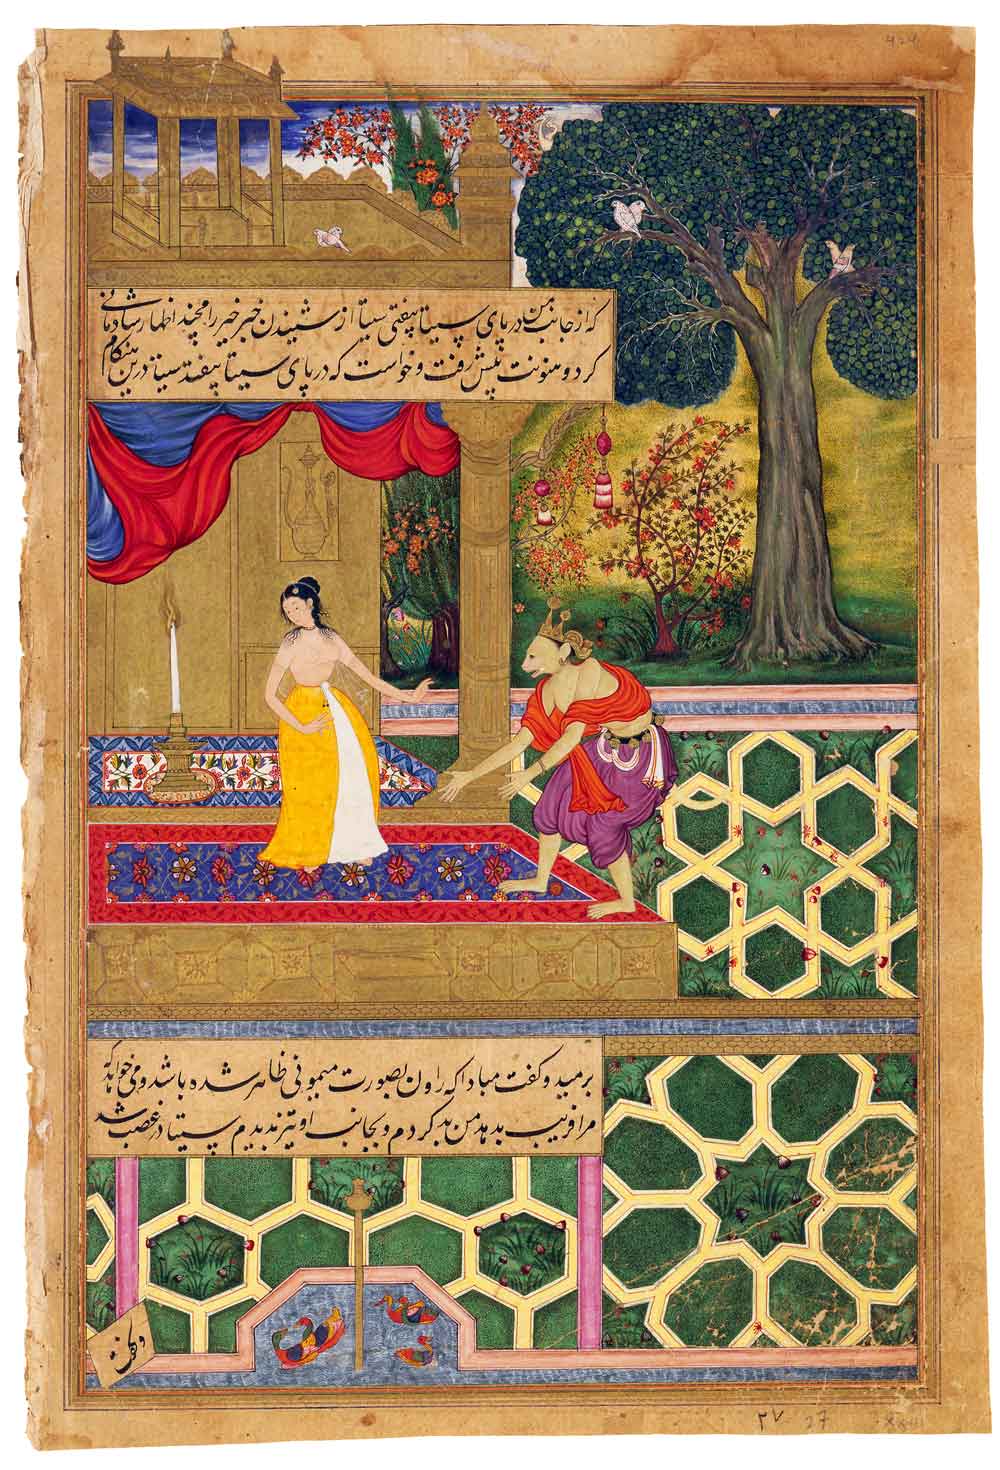 Sita Shies Away from Hanuman, India, Mughal; 1594 <br> This miniature is from the copy of the Ramayana that the Great Mughal Akbar commissioned for his mother in 1594. Nearly all the Great Mughals were enthusiastic founders of gardens, either at palaces or at mausoleums, like the famous Taj Mahal. Many Mughal gardens were of the Persian charbagh type, divided into four sections by channels, and these sections could be subdivided into innumerable sunken beds with geometrical patterns and hold smaller irrigation channels, fountains, and pavilions. The architecture, as here, was often further decorated with flowers in relief or in inlays. Rugs brought the wealth of flowers from the real garden into the pavilions, and some were even designed as stylized gardens with beds and watercourses.